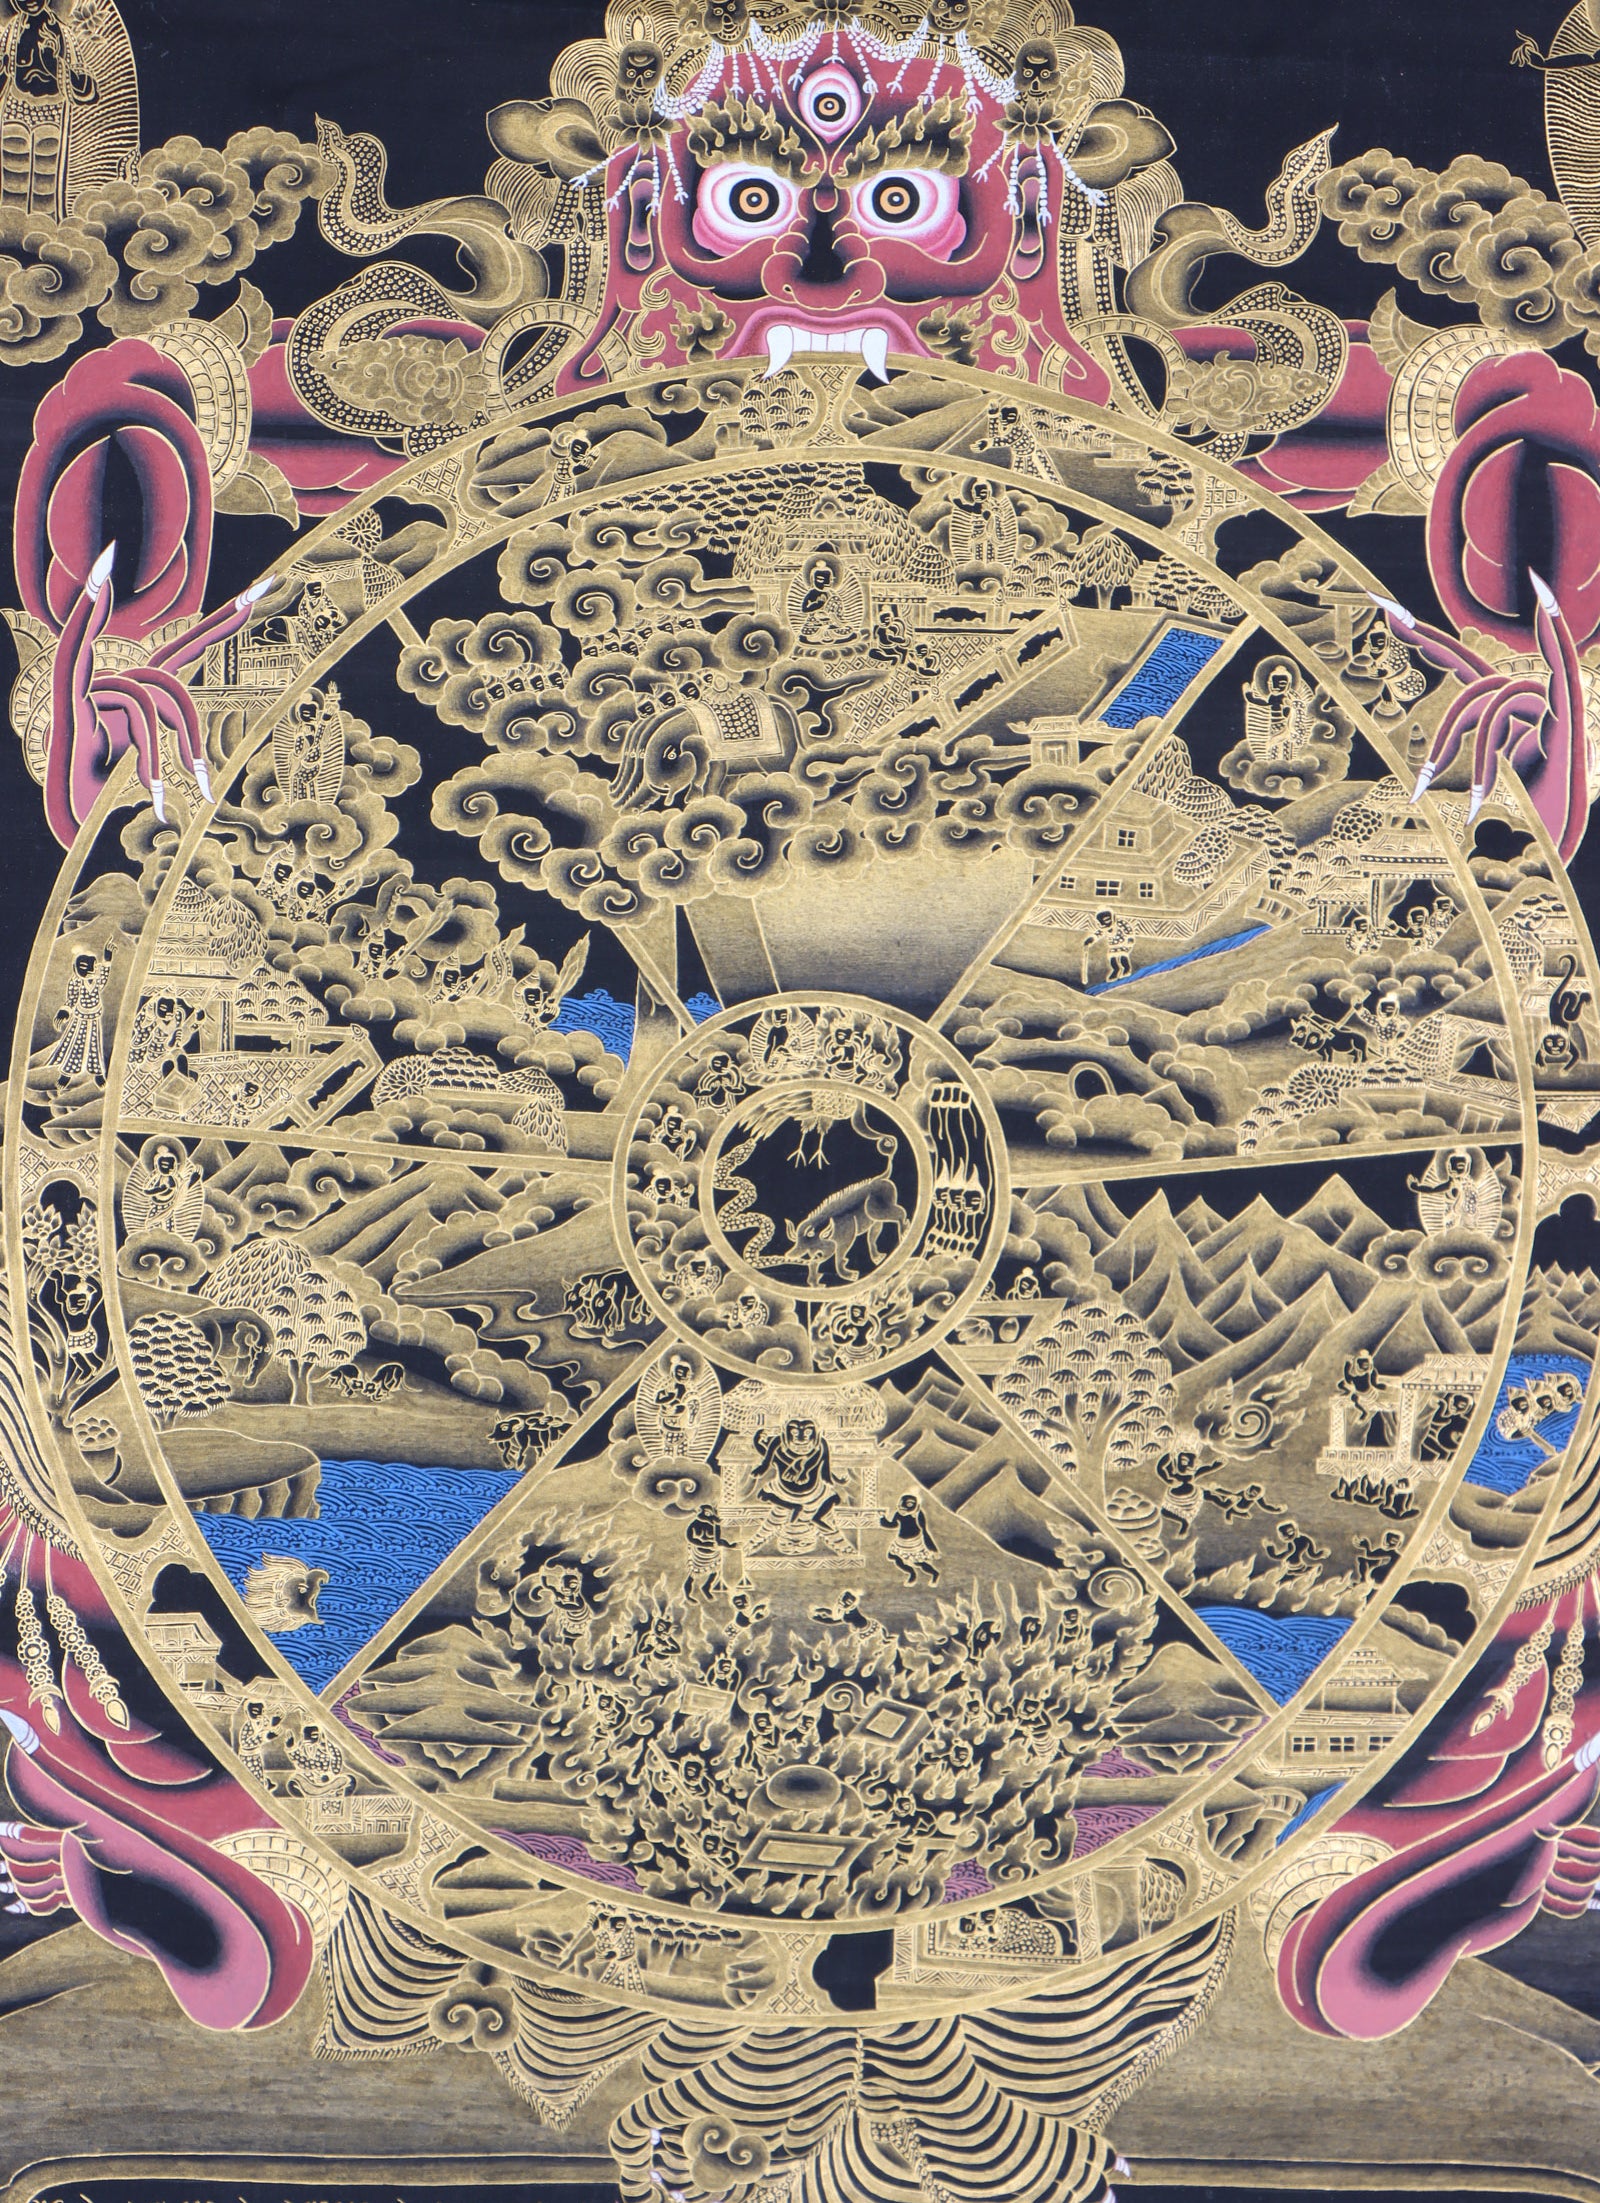 Wheel of life thangka for for aiding meditation and self-reflection on the road to enlightenment.